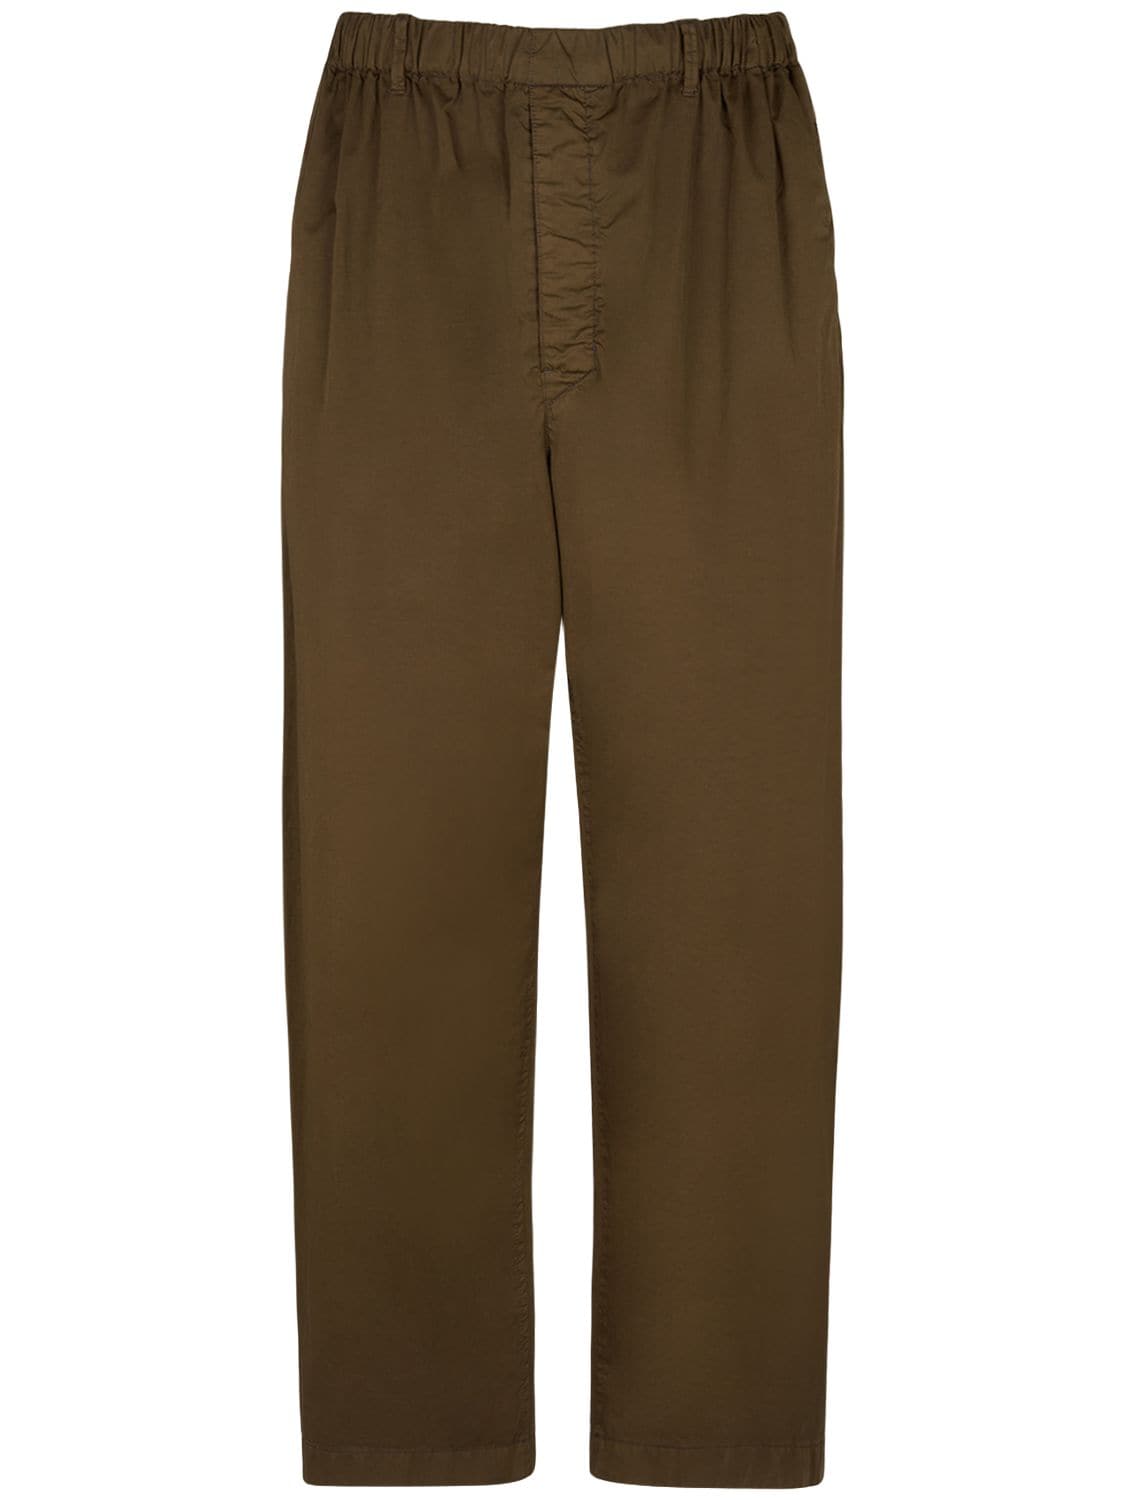 Lemaire Stretch Waist Loose Cotton Pants In Tobacco